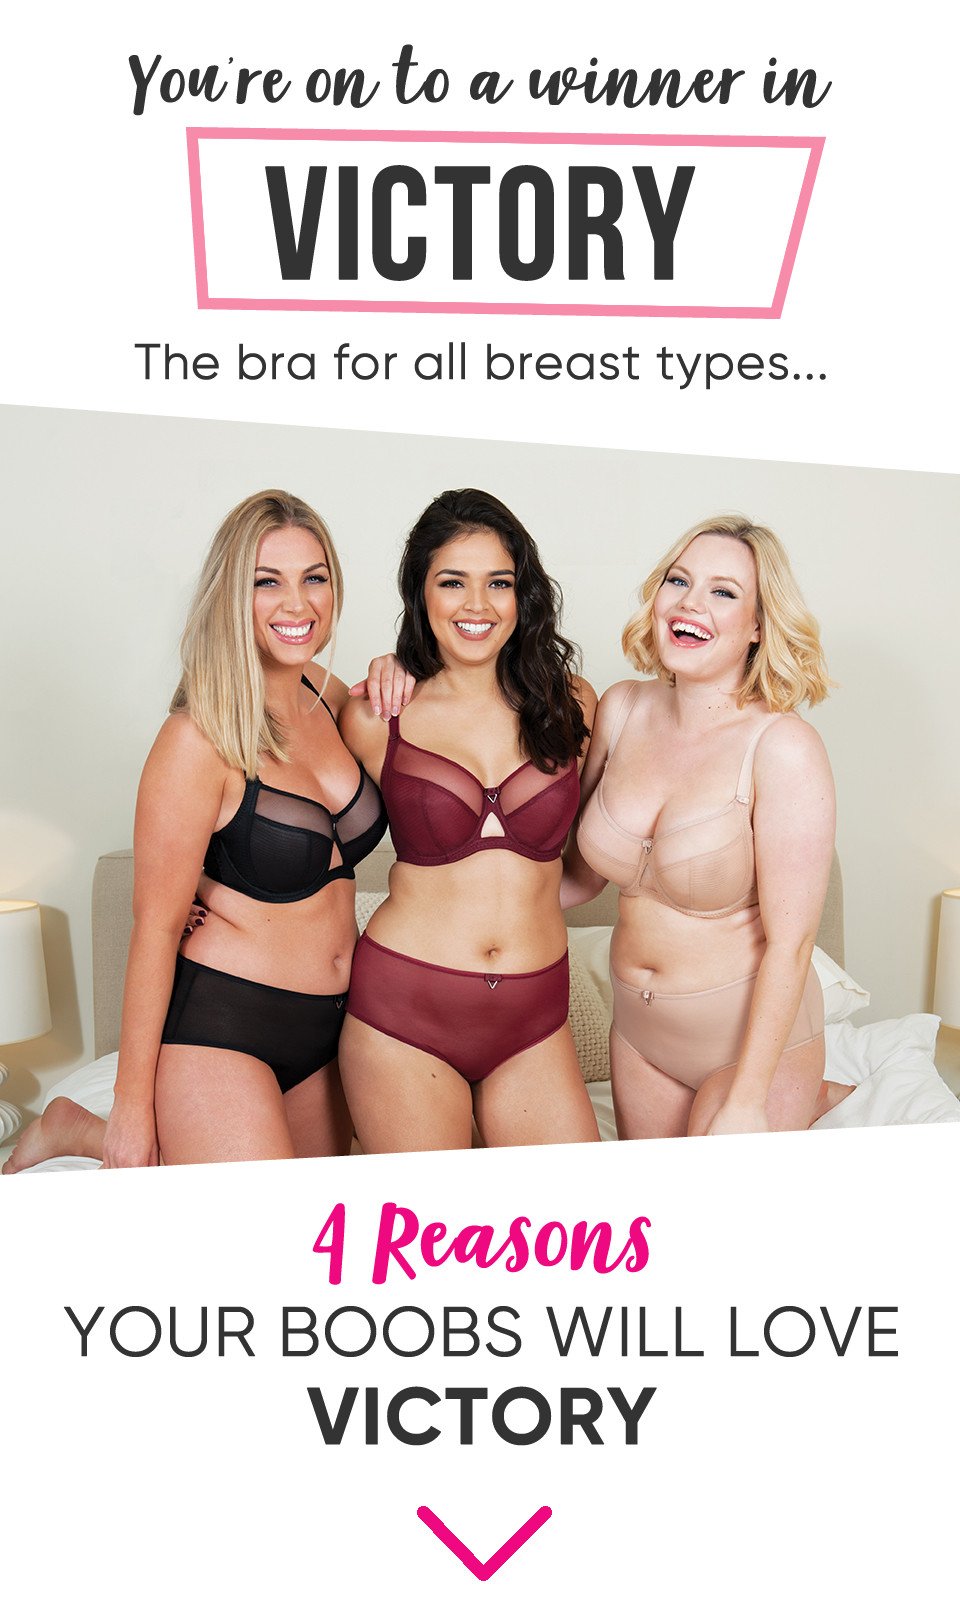 Curvy Kate: Why Your Boobs Need This Bra!